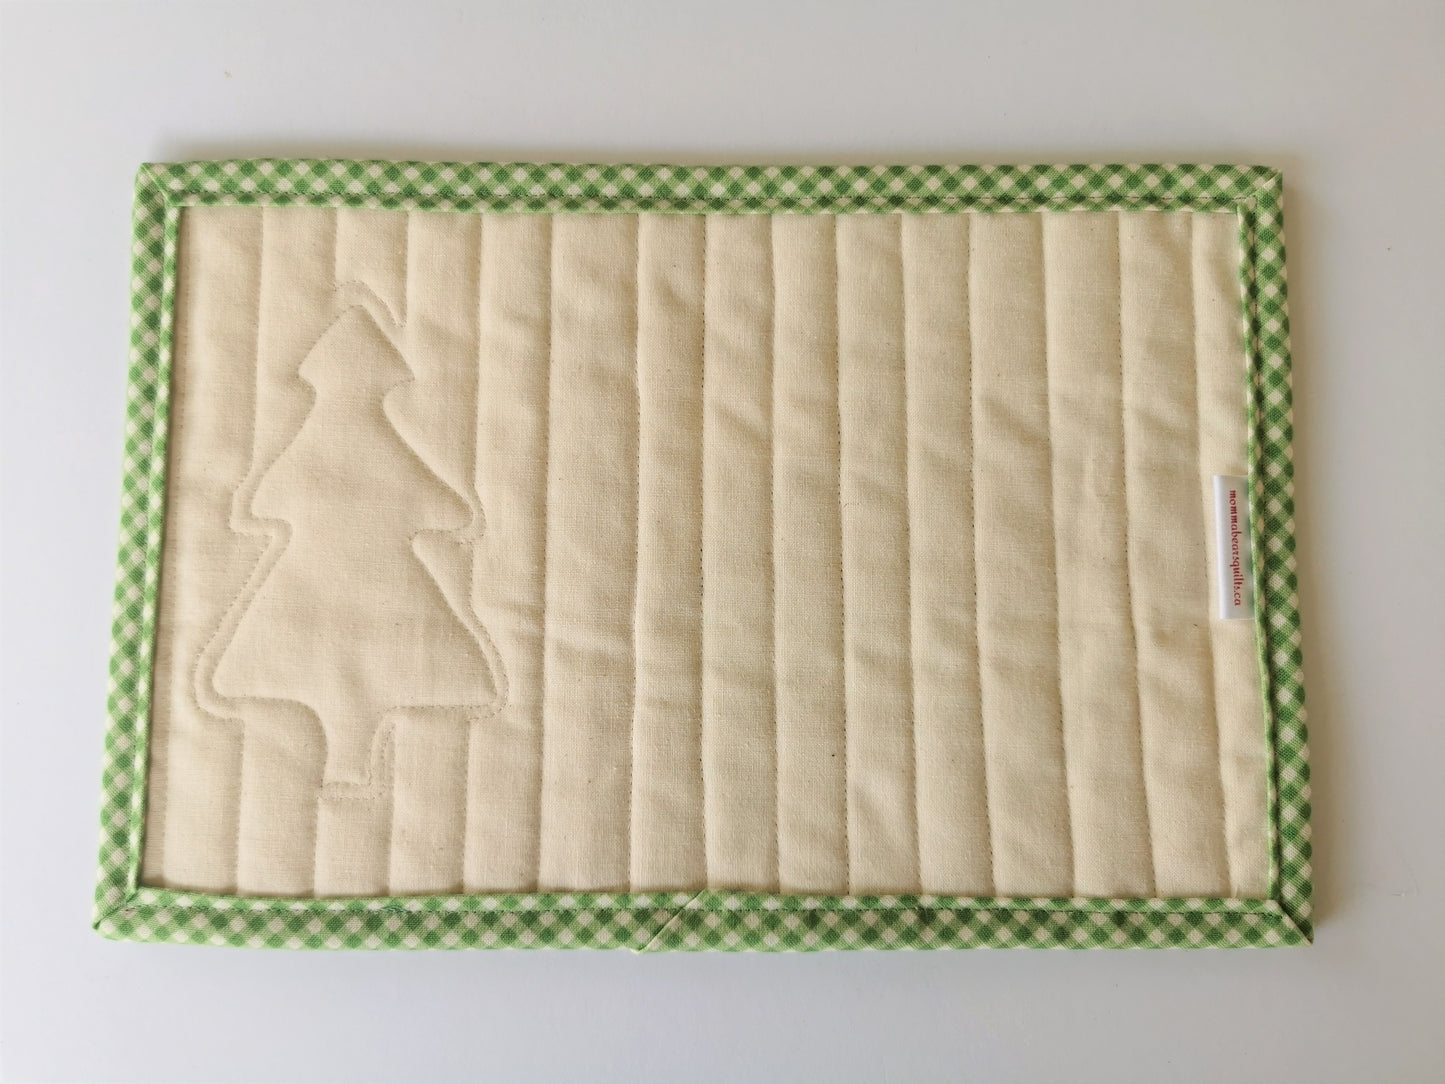 Winter Mug Rug | Quilted Snack Mat | Christmas Coaster